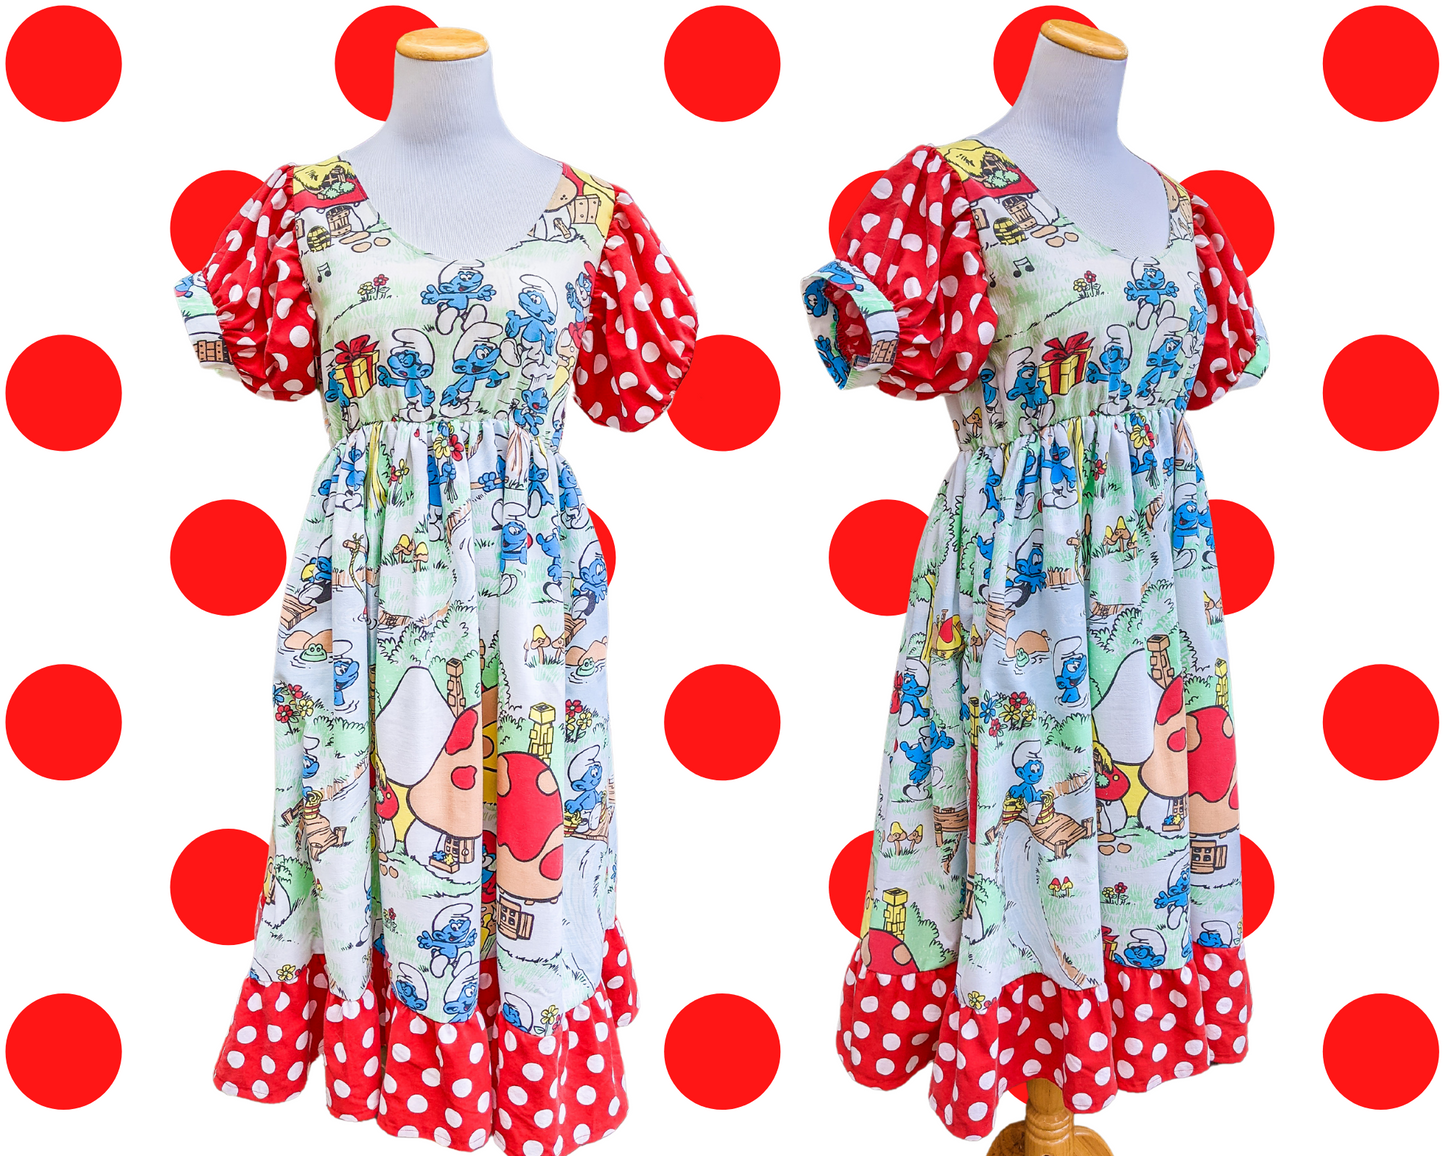 Handmade, Upcycled The Smurfs Bedsheet Dress with Red and White Polka Dot Fabric, Short Puffy Sleeves Size S/M